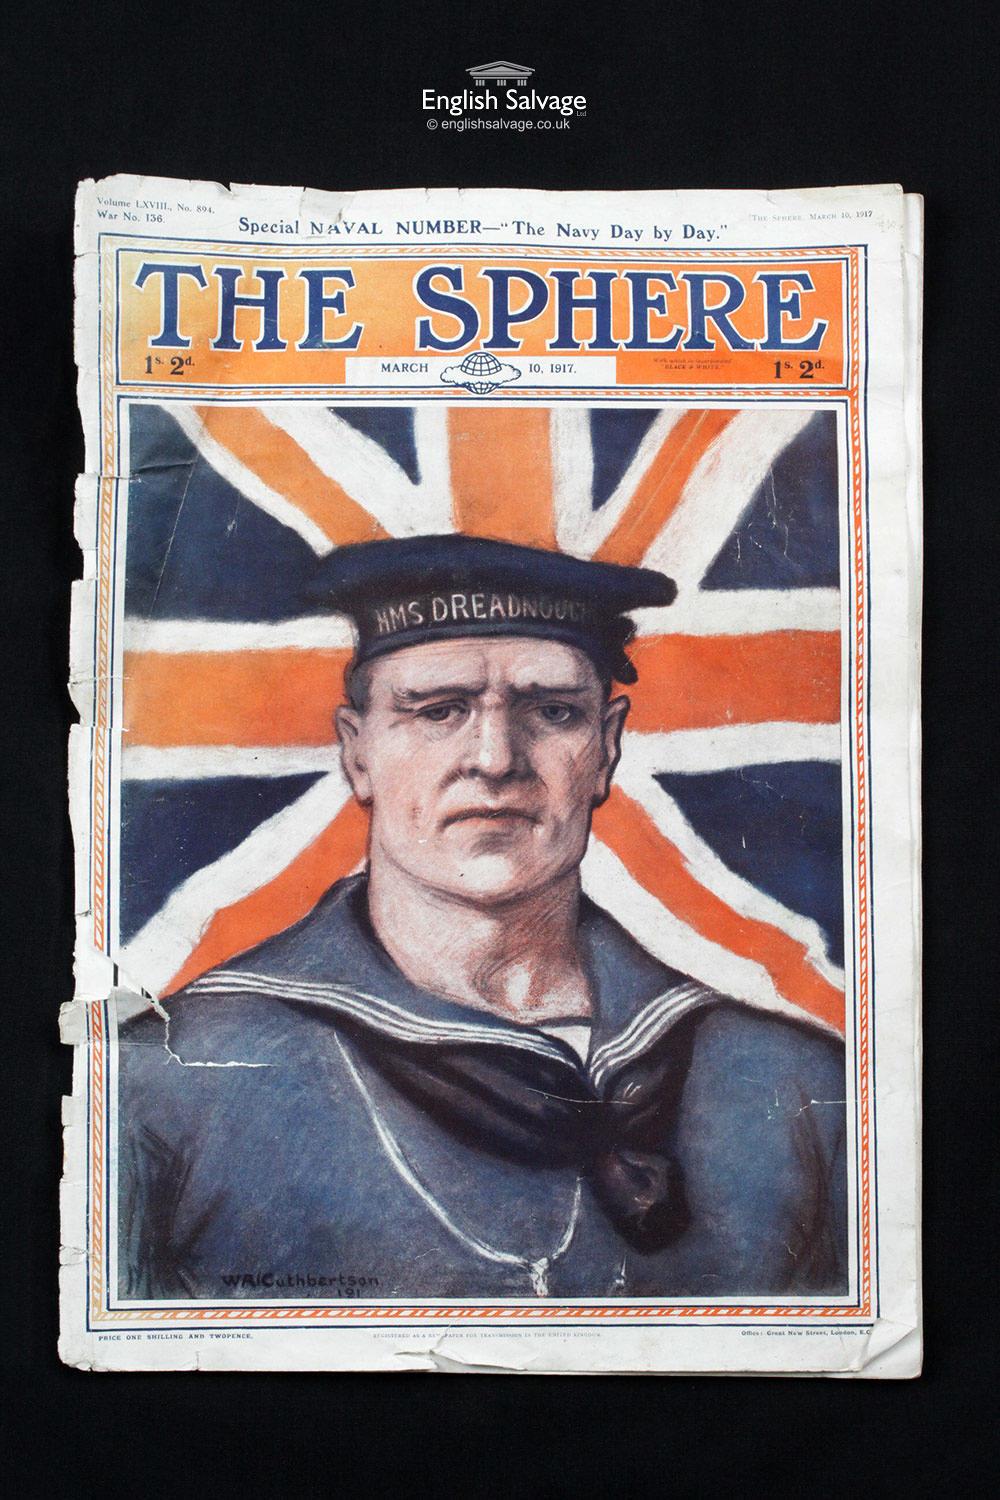 Reclaimed The Sphere magazine, dated 10th March 1917. This issue focuses on the British Navy 'Day by Day'. The back cover is missing, there are tears to edges and some rips to a few pages.